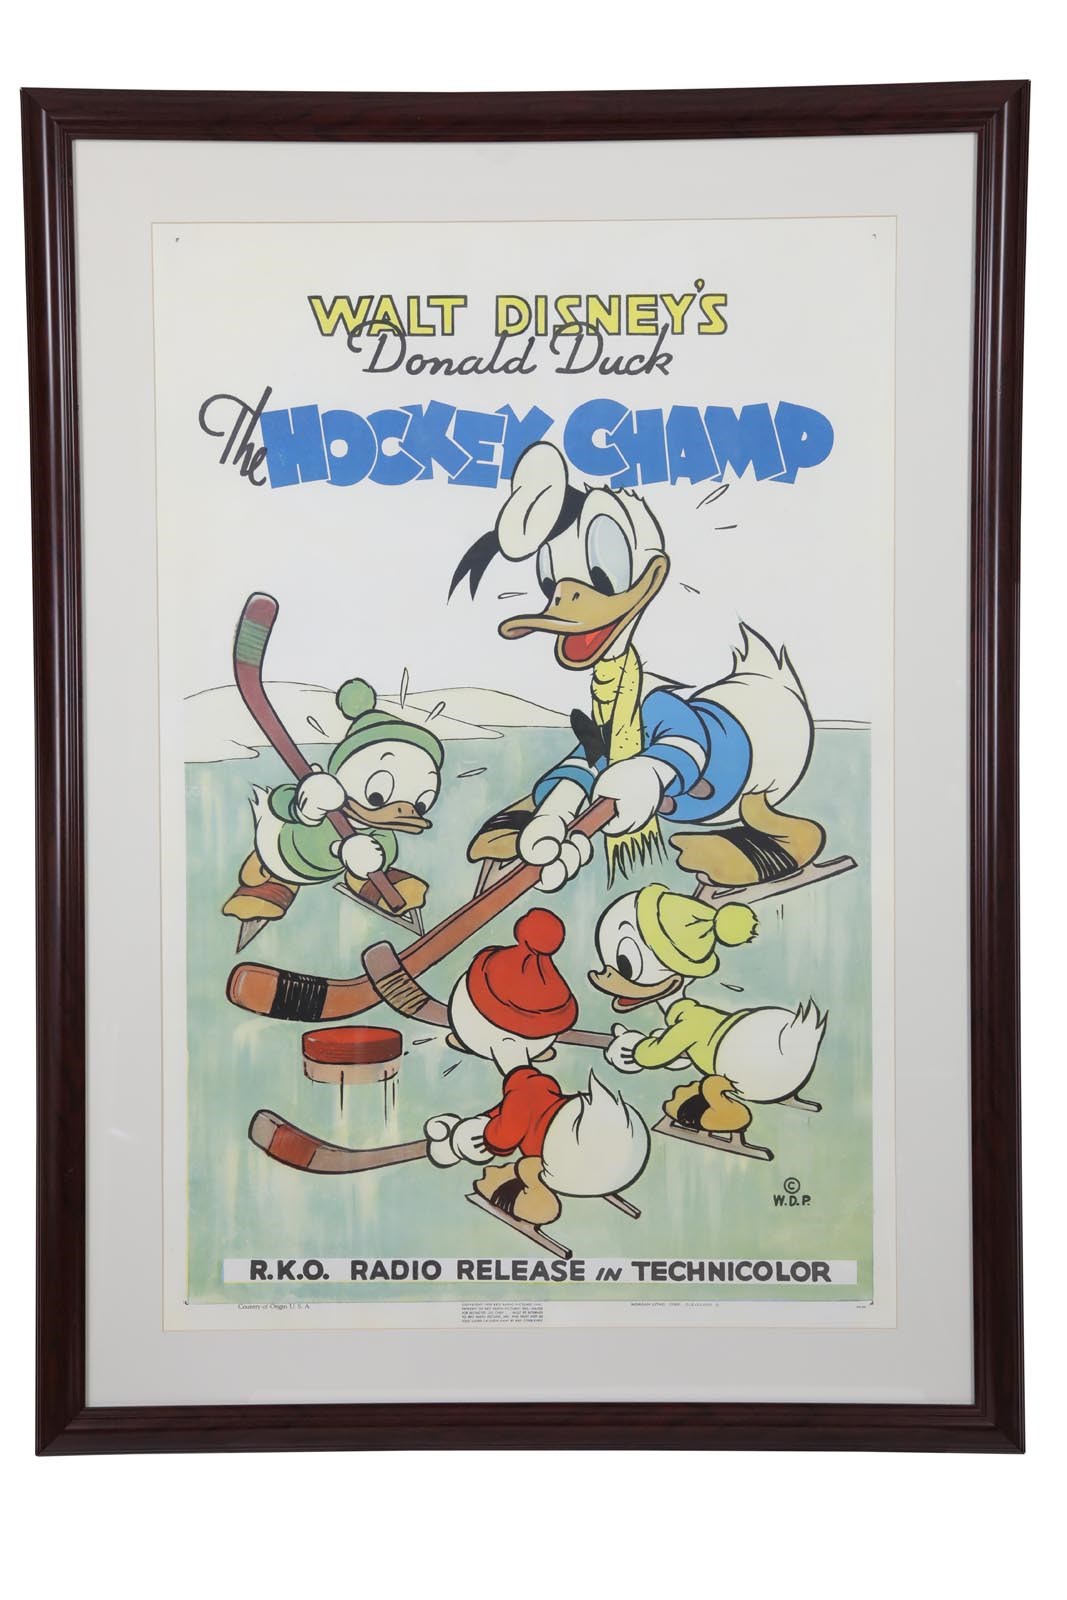 Best of the Best - 1939 Donald Duck "The Hockey Champ" Original Release Movie Poster